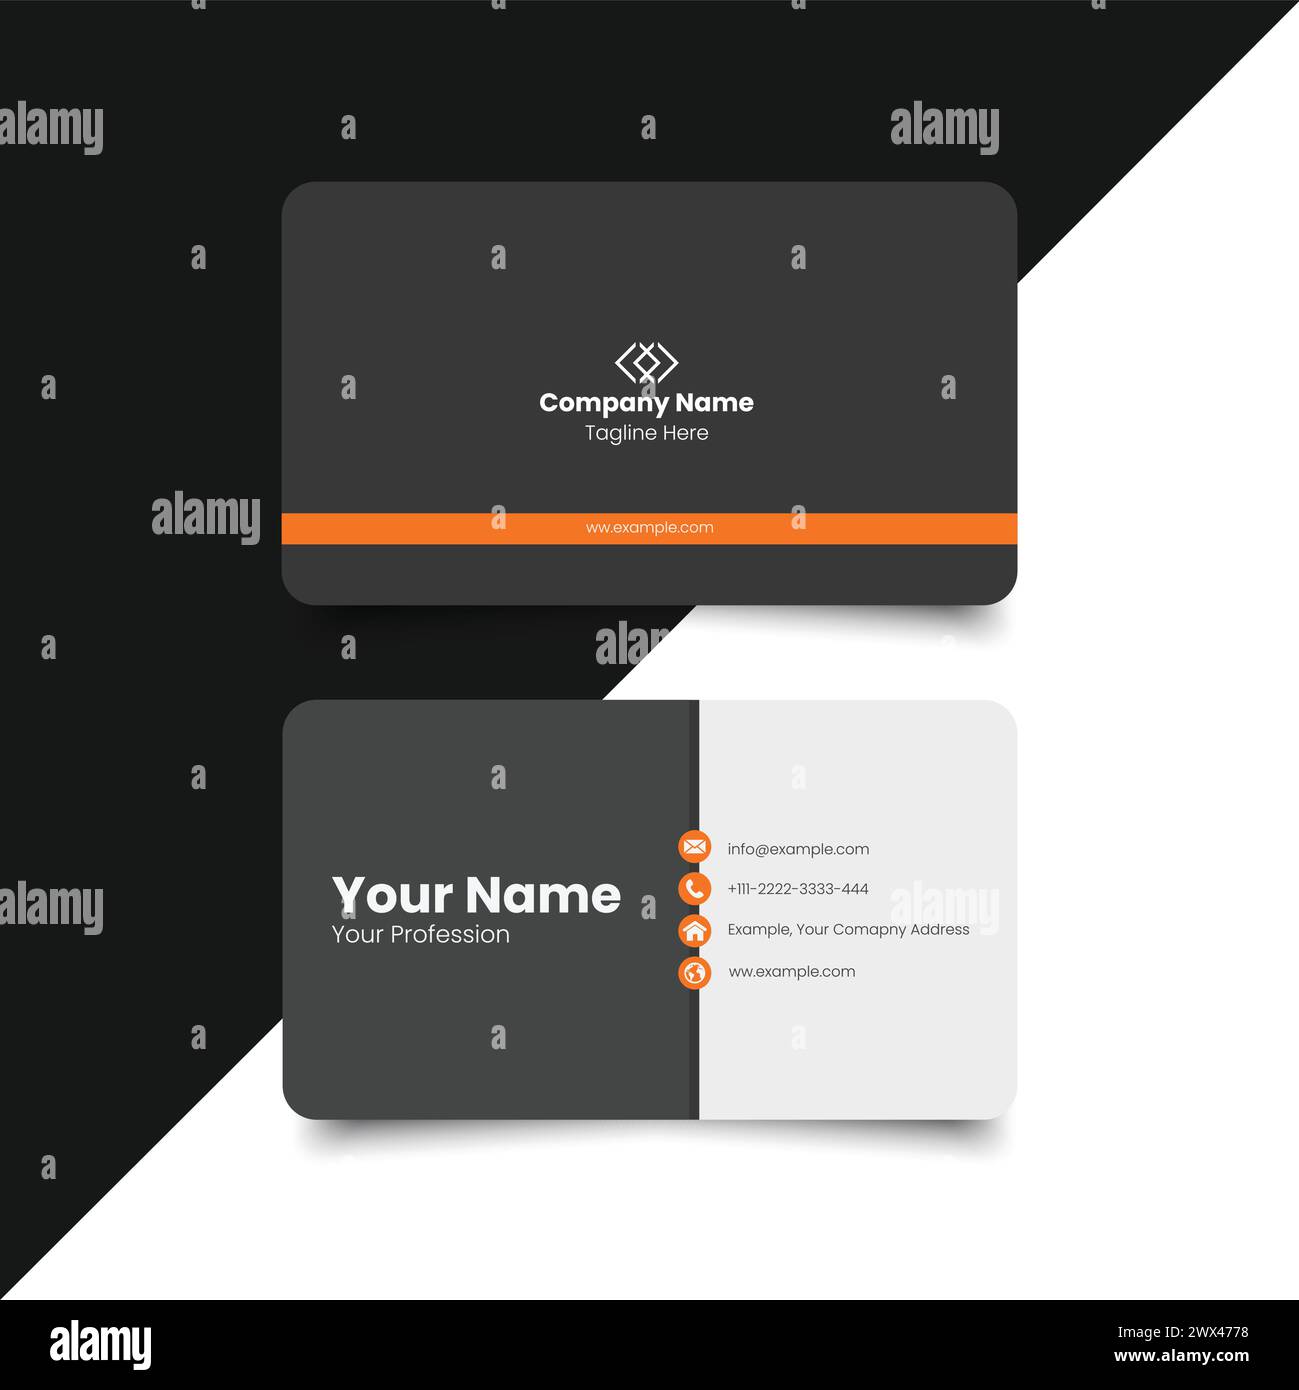 Web Simple Business Card Layout. creative modern name card and business card. Clean Design. corporate design template,Clean professional business card Stock Vector